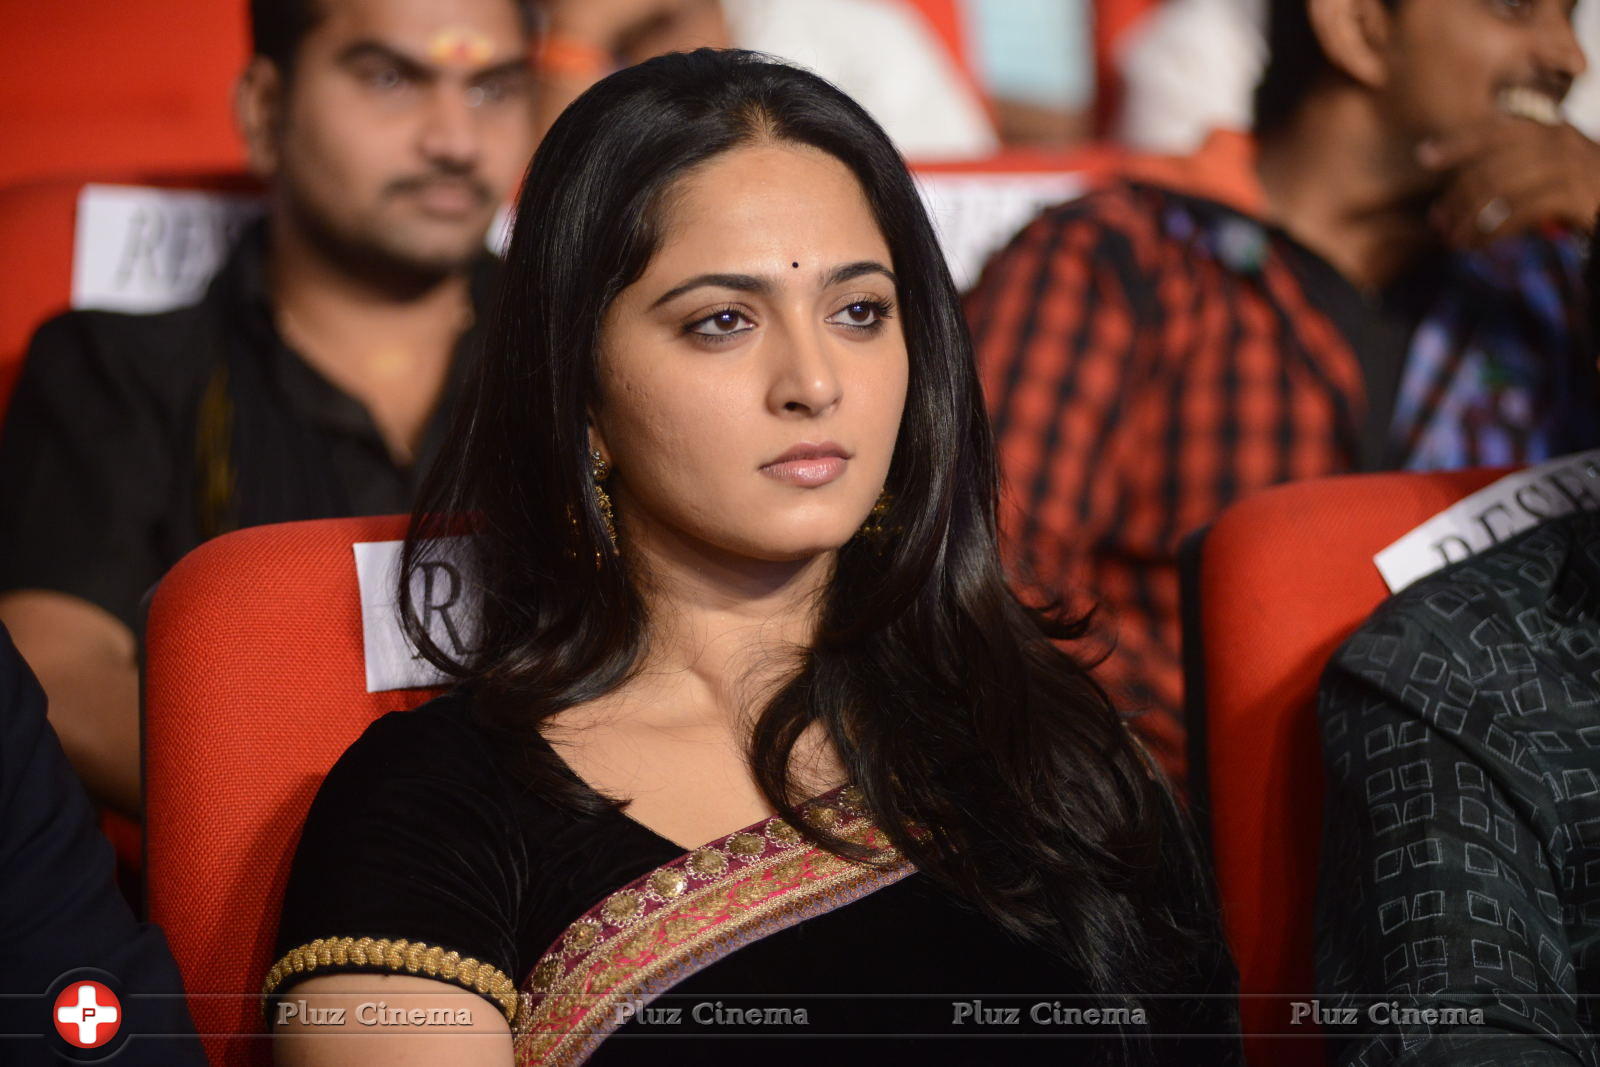 Anushka Shetty at Varna Audio Release Function Photos | Picture 618446